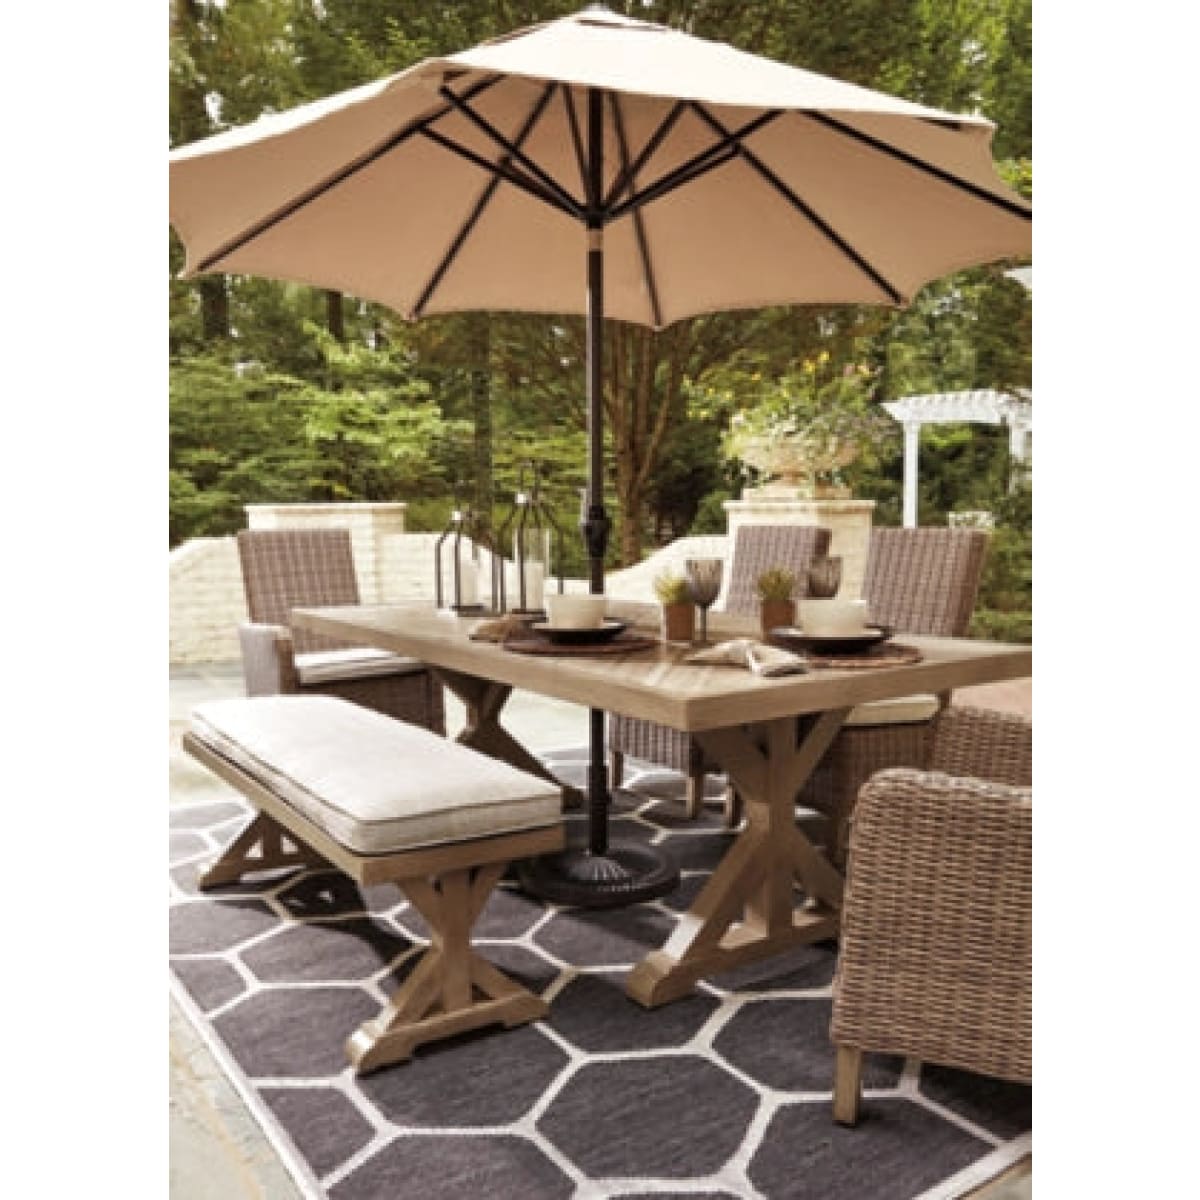 Beachcroft Dining Table Set with Umbrella Option - 42.38 W x 84.38 D x 29.5 H - Outdoor Sofa